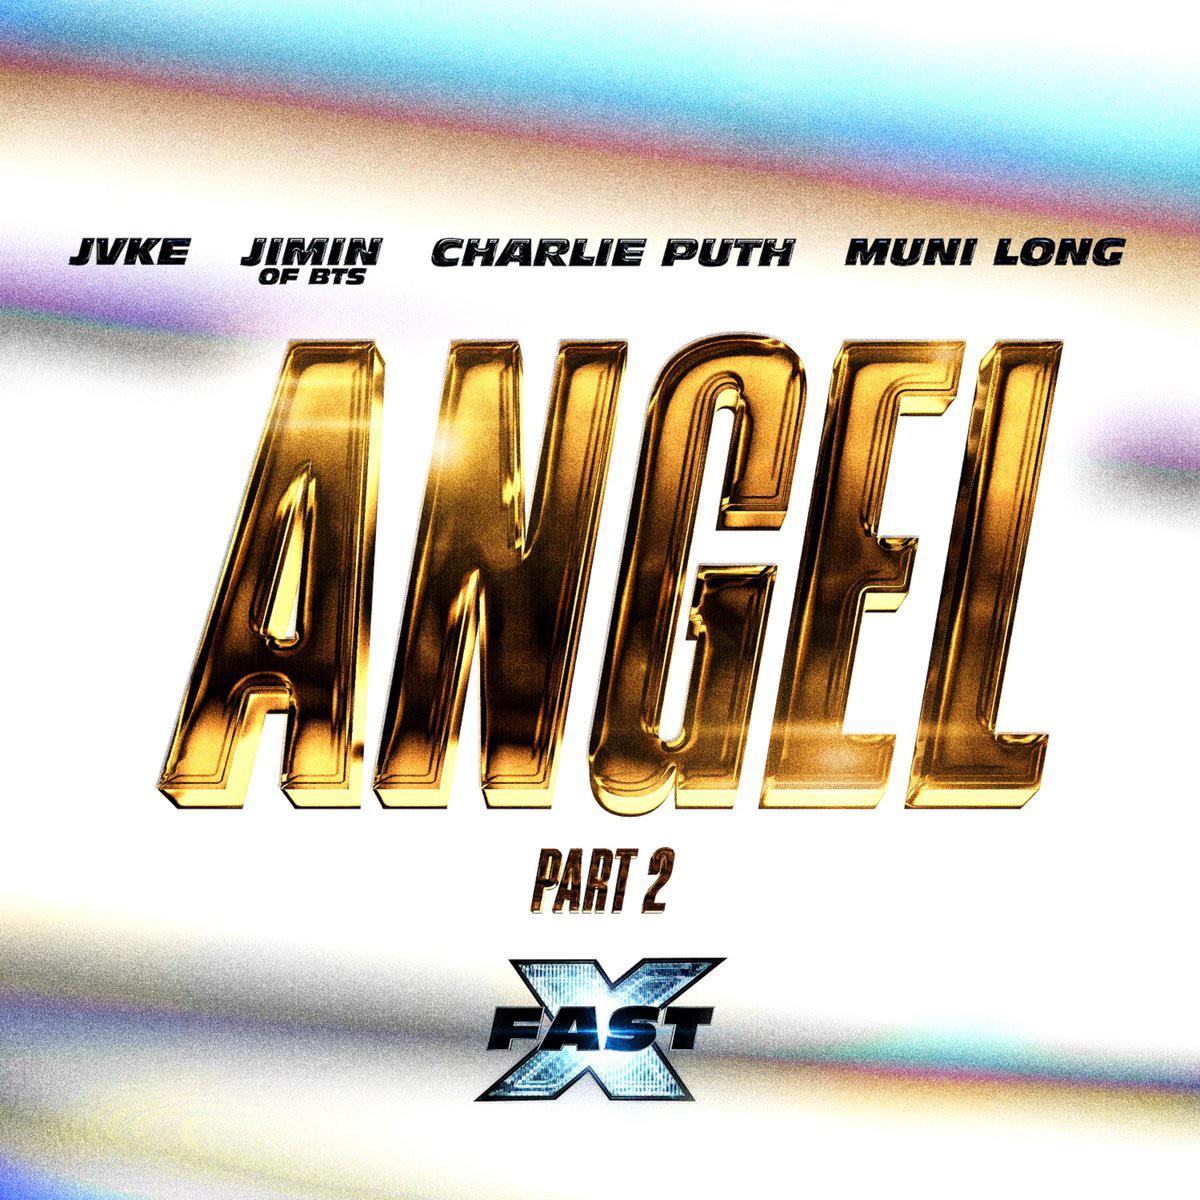 [The Fast Saga] Angel Pt.2! This time we ride w/ @TheFastSaga Family to welcome @charlieputh! #FASTX - 120623